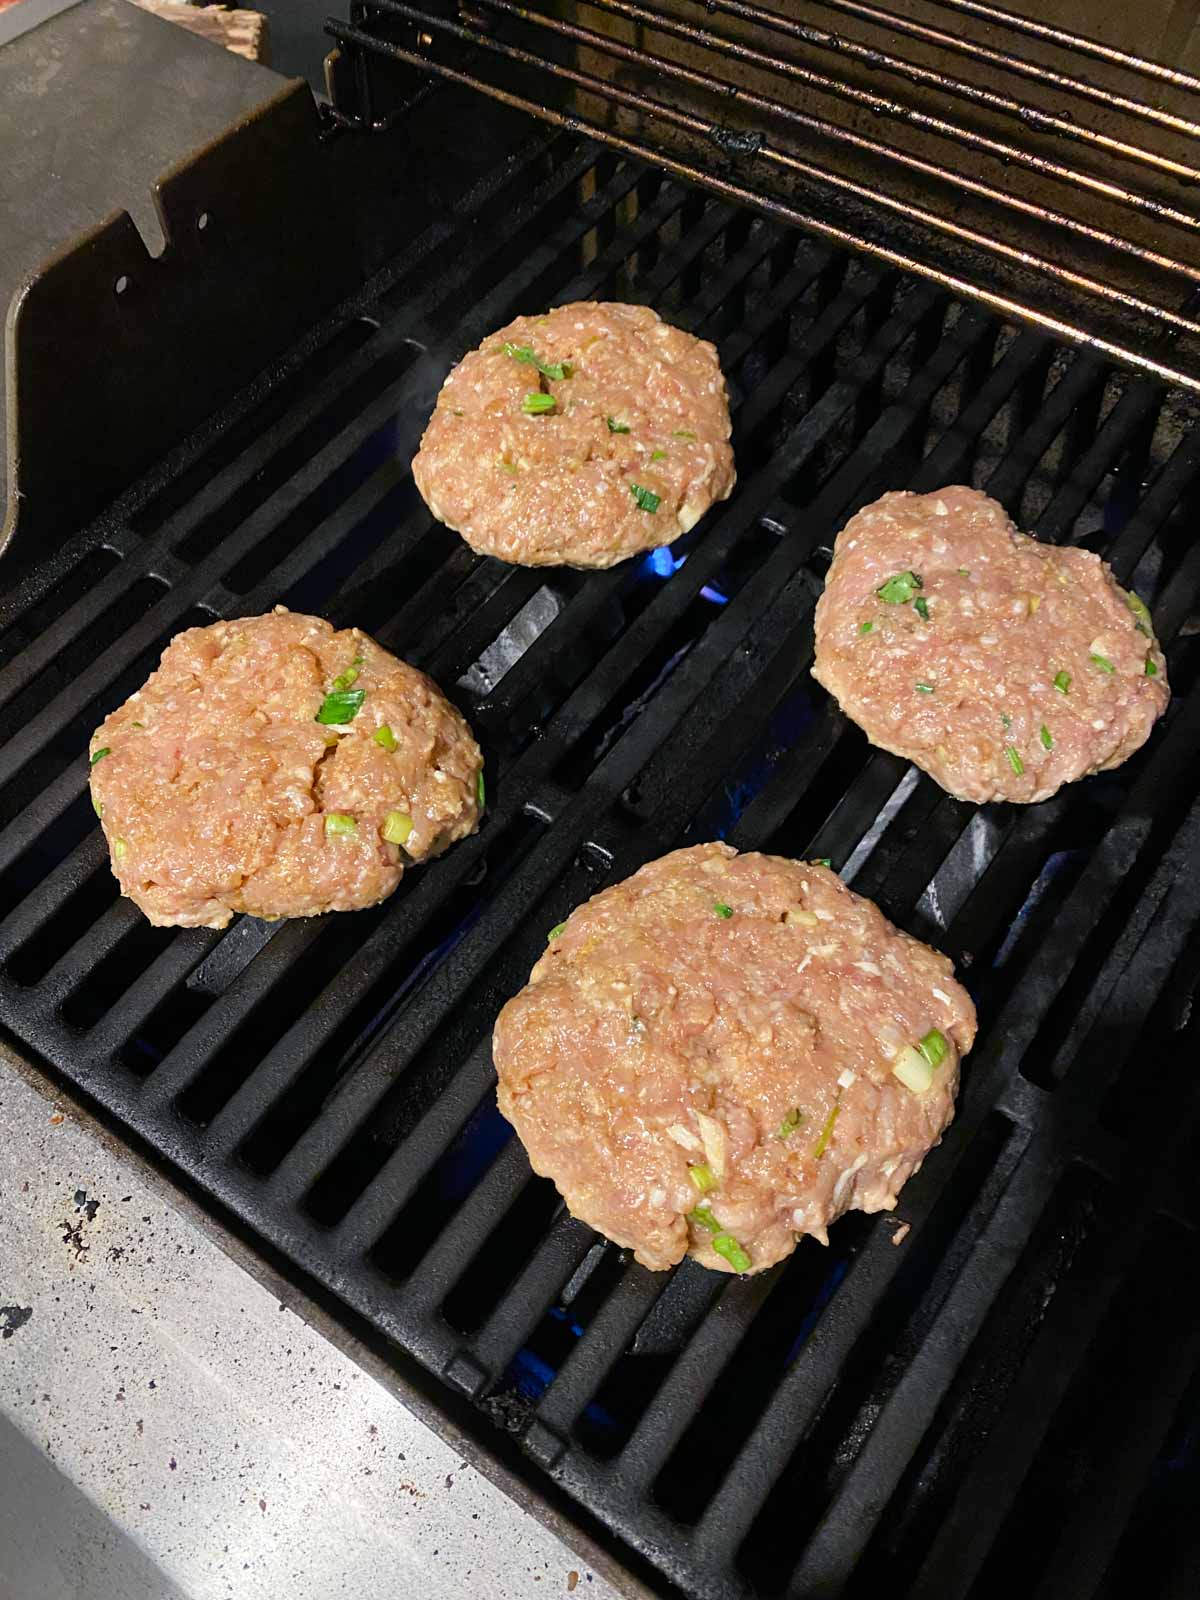 Chicken burgers on a gas grill.